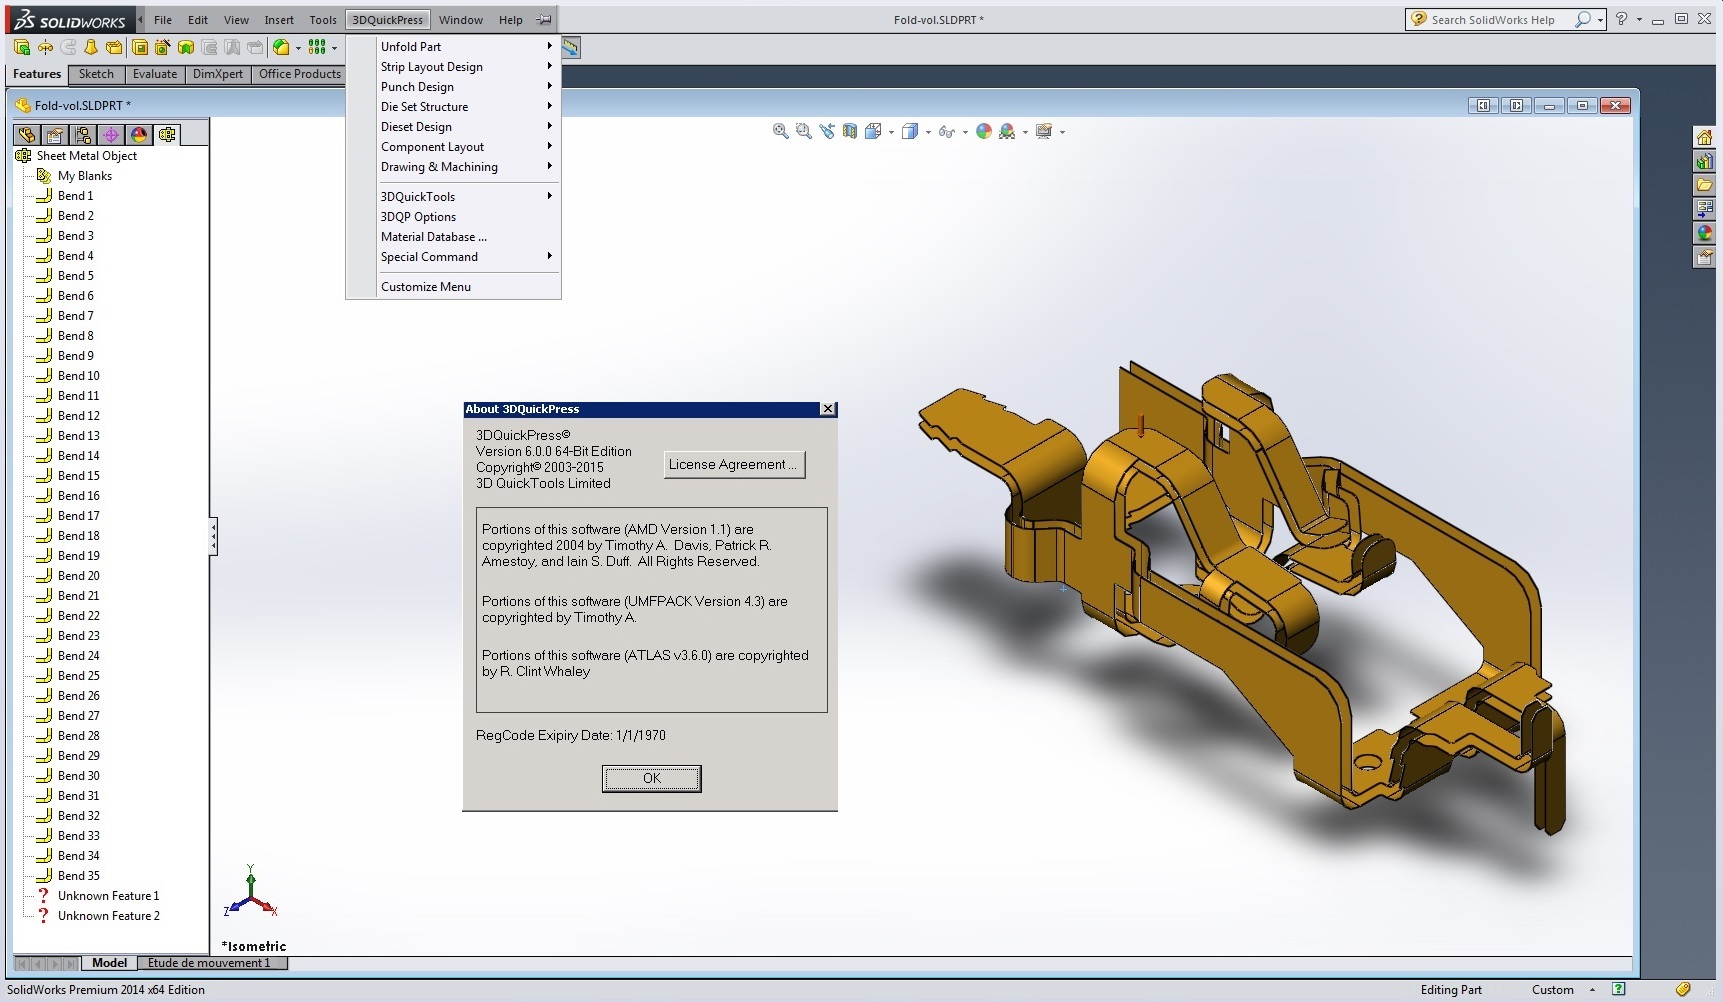 Design with 3DQuickPress v6.0.0 for SolidWorks 2011-2016 full